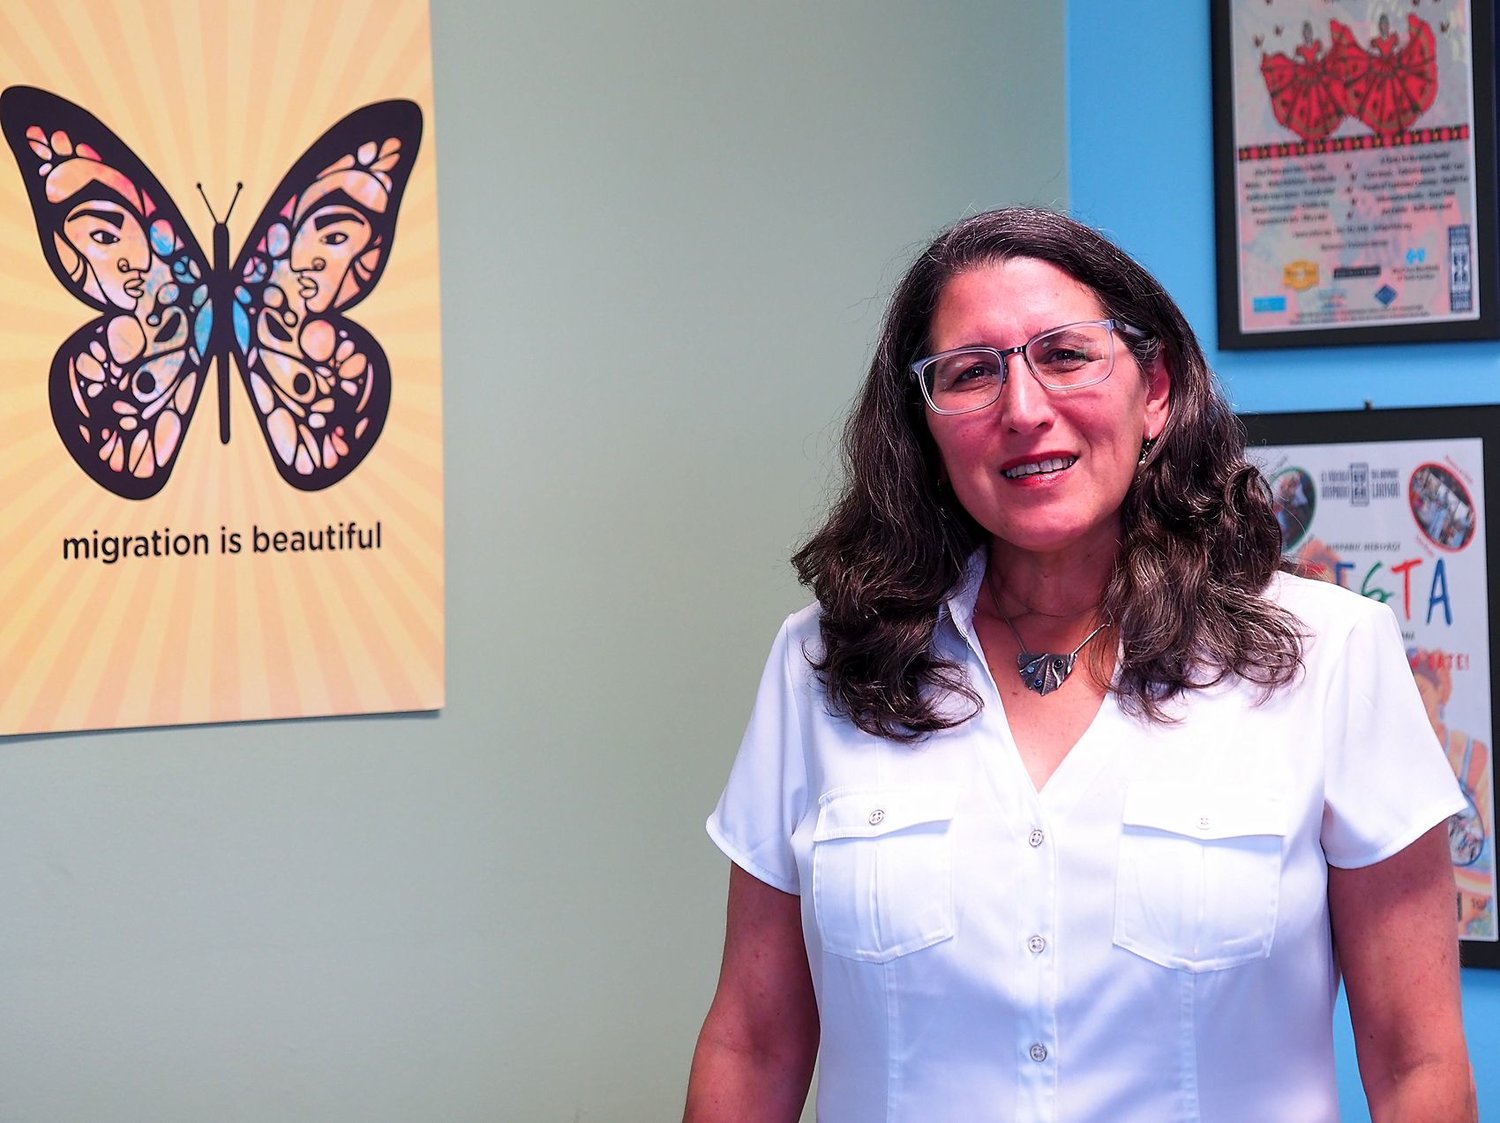 Ilana Dubester, pictured here, is the founder and executive director of the Hispanic Liaison. 'In Chatham, it’s gotten so much better,’ she said. ‘There are still, you know, gaps out there, particularly when it comes to translations, but it certainly has gotten better.'